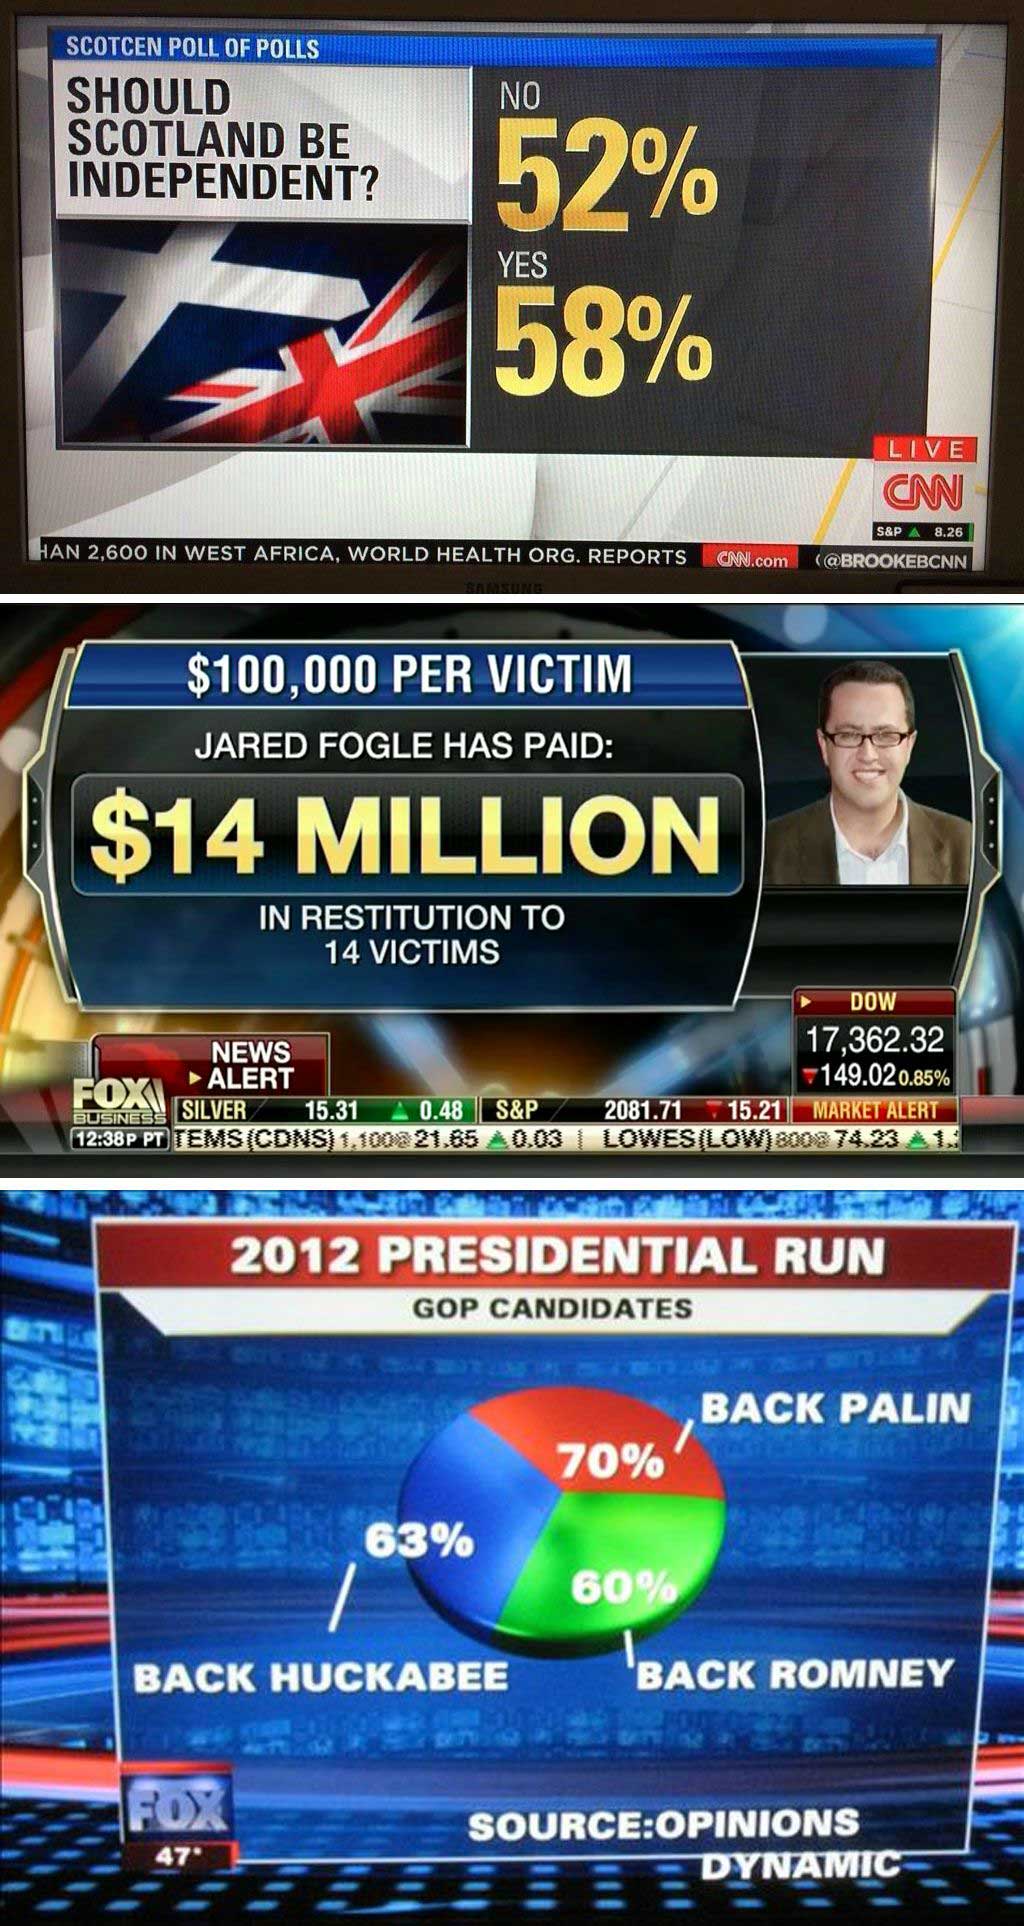 fox news pie chart - Scotcen Poll Of Polls No Should Scotland Be Independent? 52% 58% Yes Live Cm Han 2.600 In West Africa, World Health Org. Reports S&P A 8.26 Cnn.com $100,000 Per Victim Jared Fogle Has Paid $14 Million In Restitution To 14 Victims News